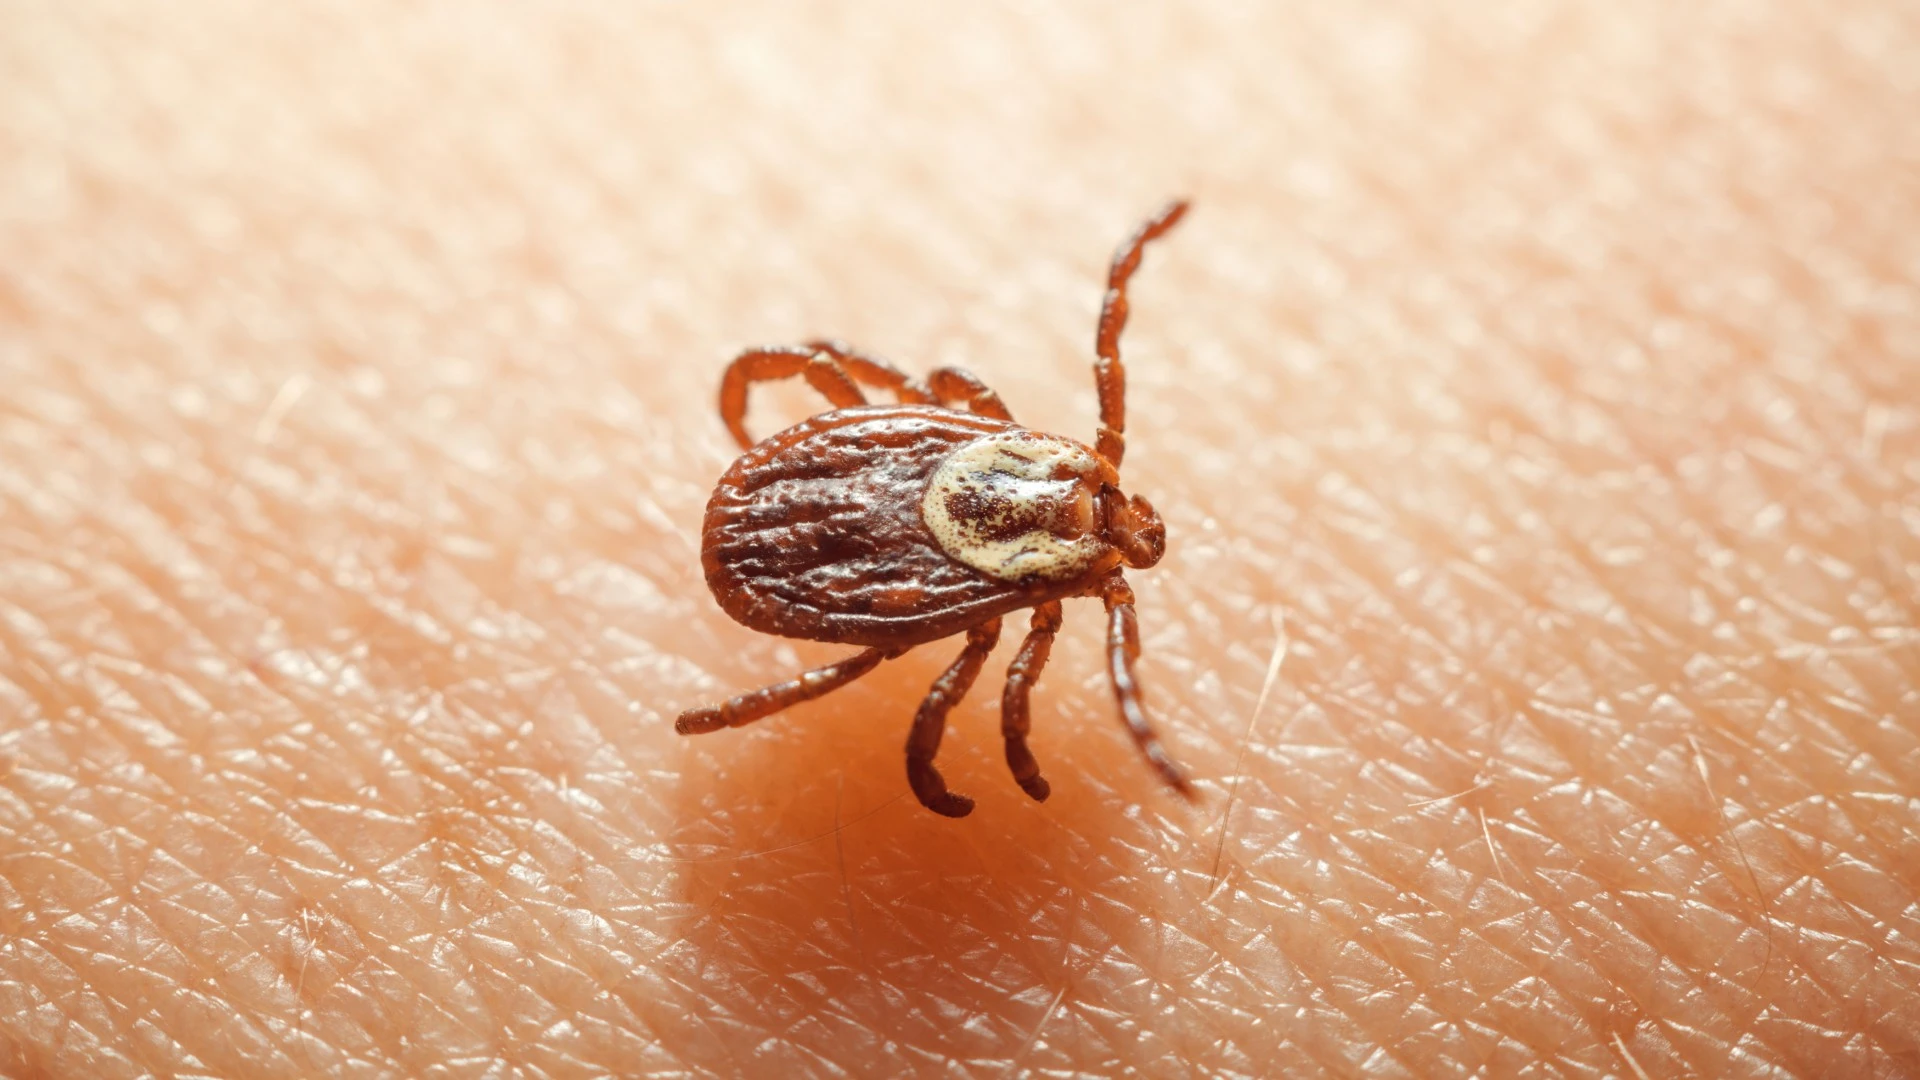 Tick found on a homeowner's arm in Ankeny, IA.